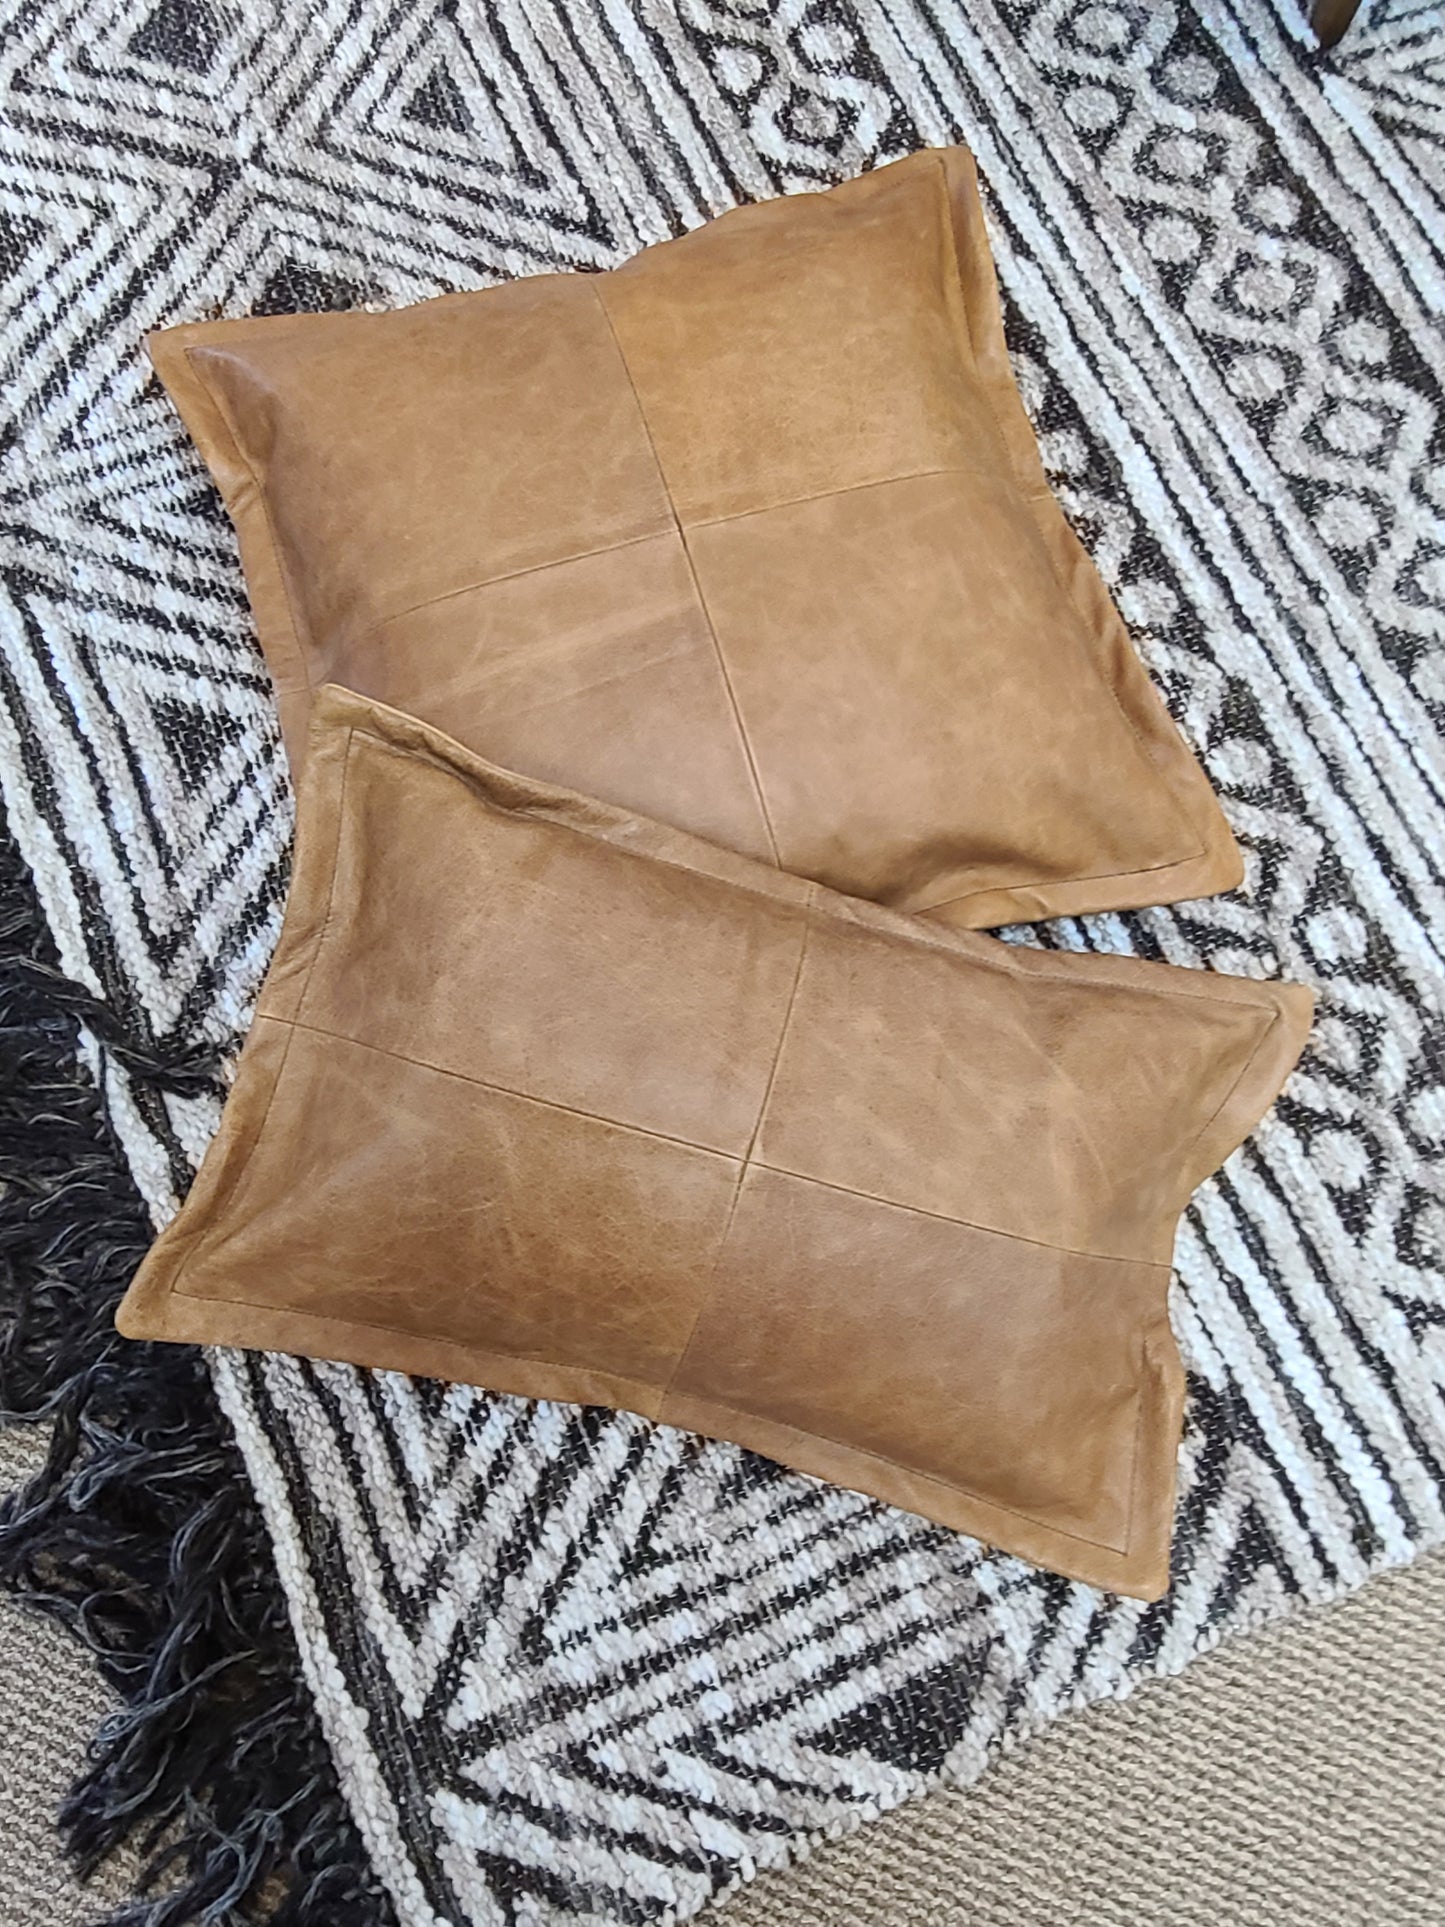 100% Lambskin Leather Caramel Brown Throw Pillow Cover - 20 x 12-Status Co. Leather Studio